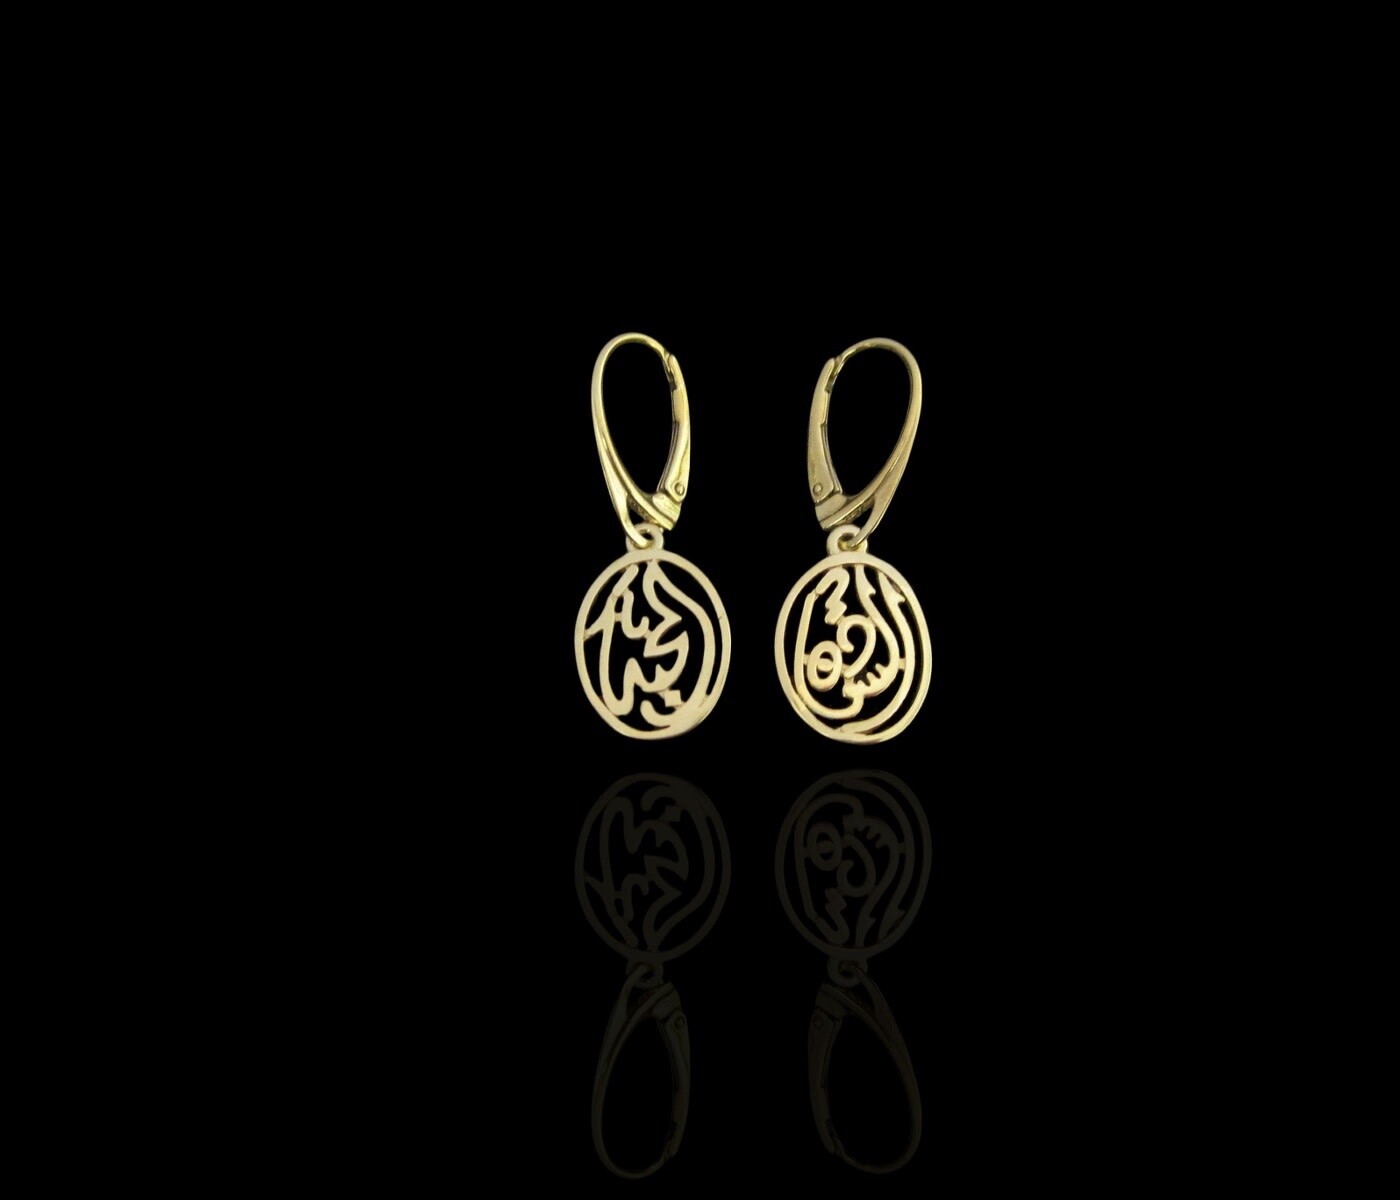 Light Oval Salam Earrings With French Hook